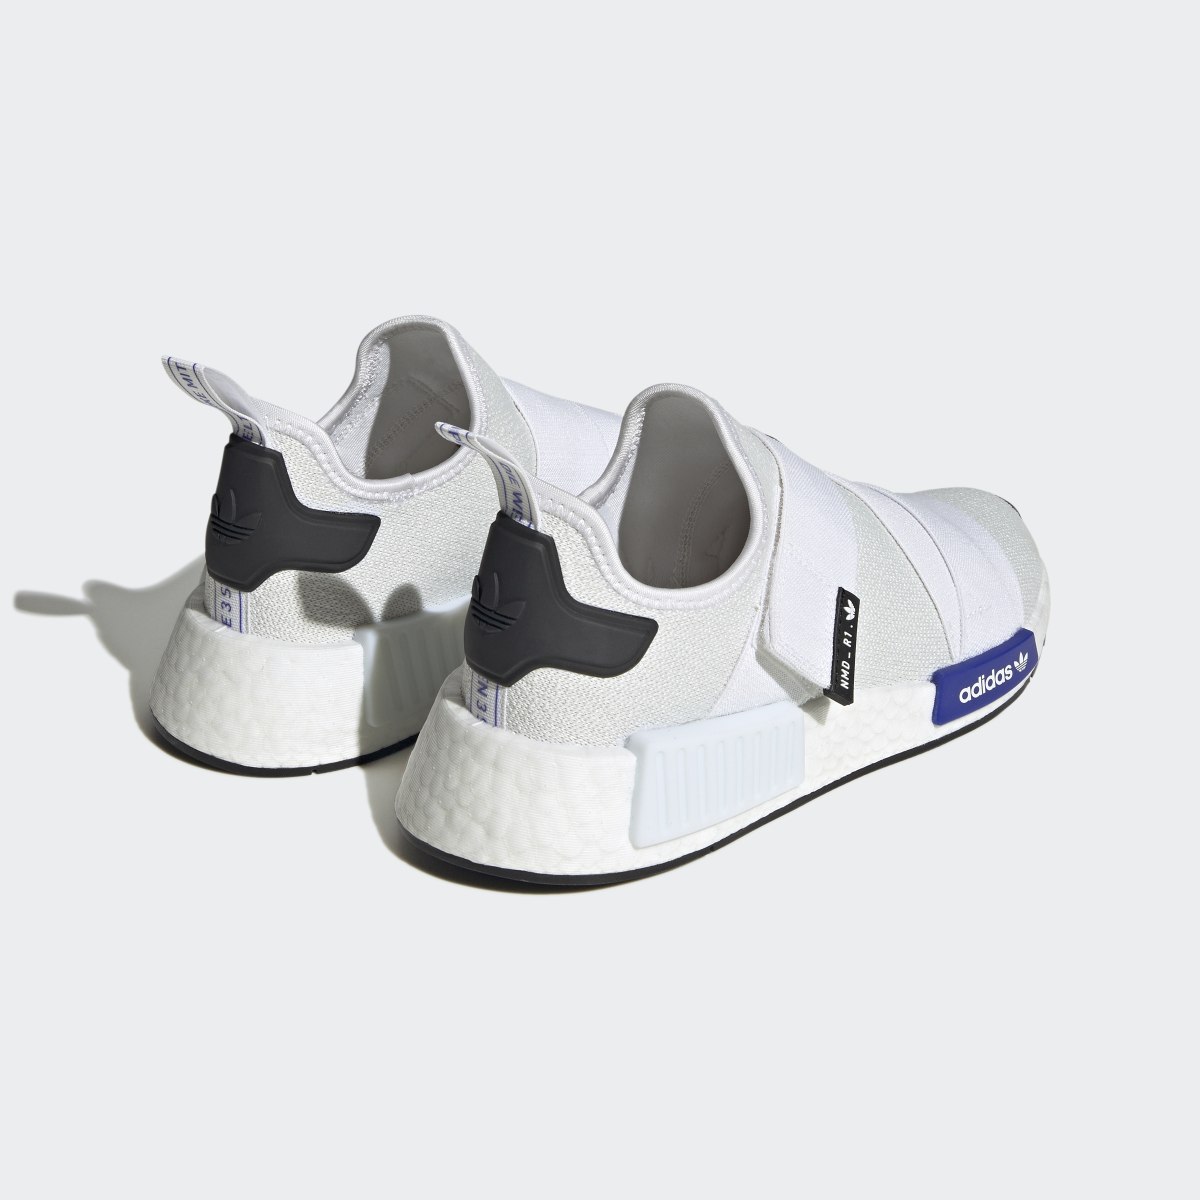 Adidas NMD_R1 Strap Shoes. 6